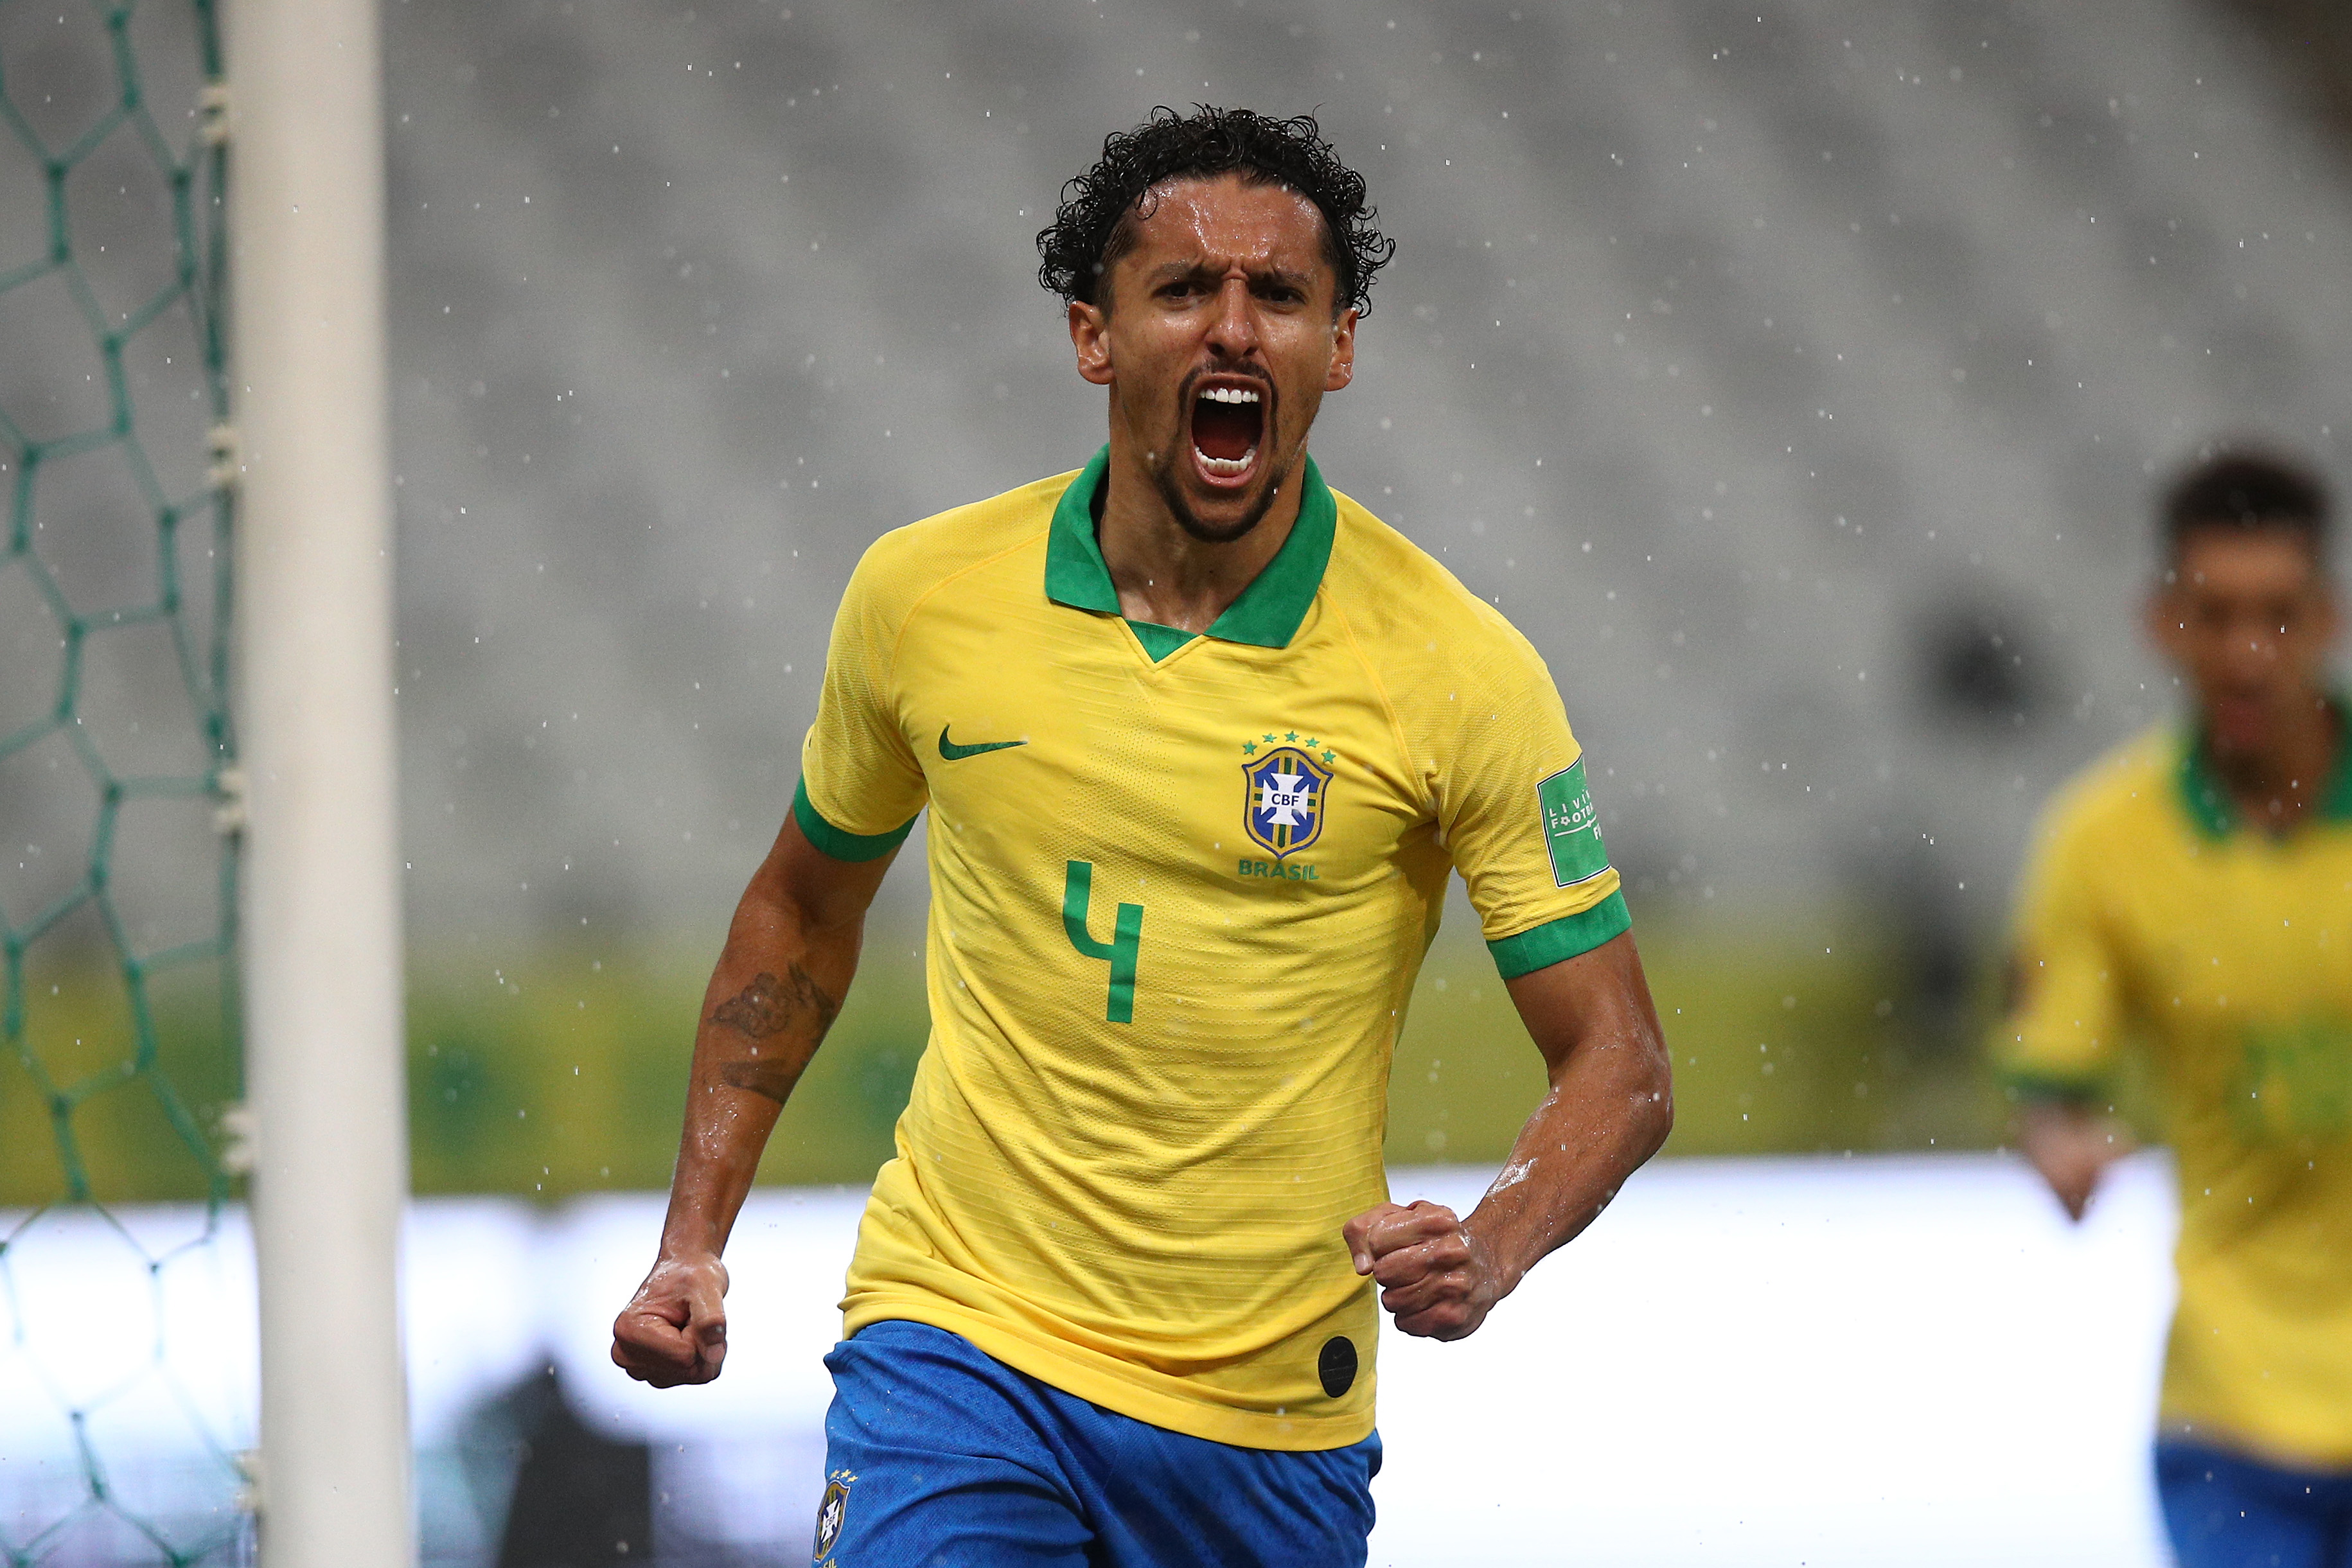 Video: 'He Allowed Me To Raise My Level of Play' - Marquinhos on Former